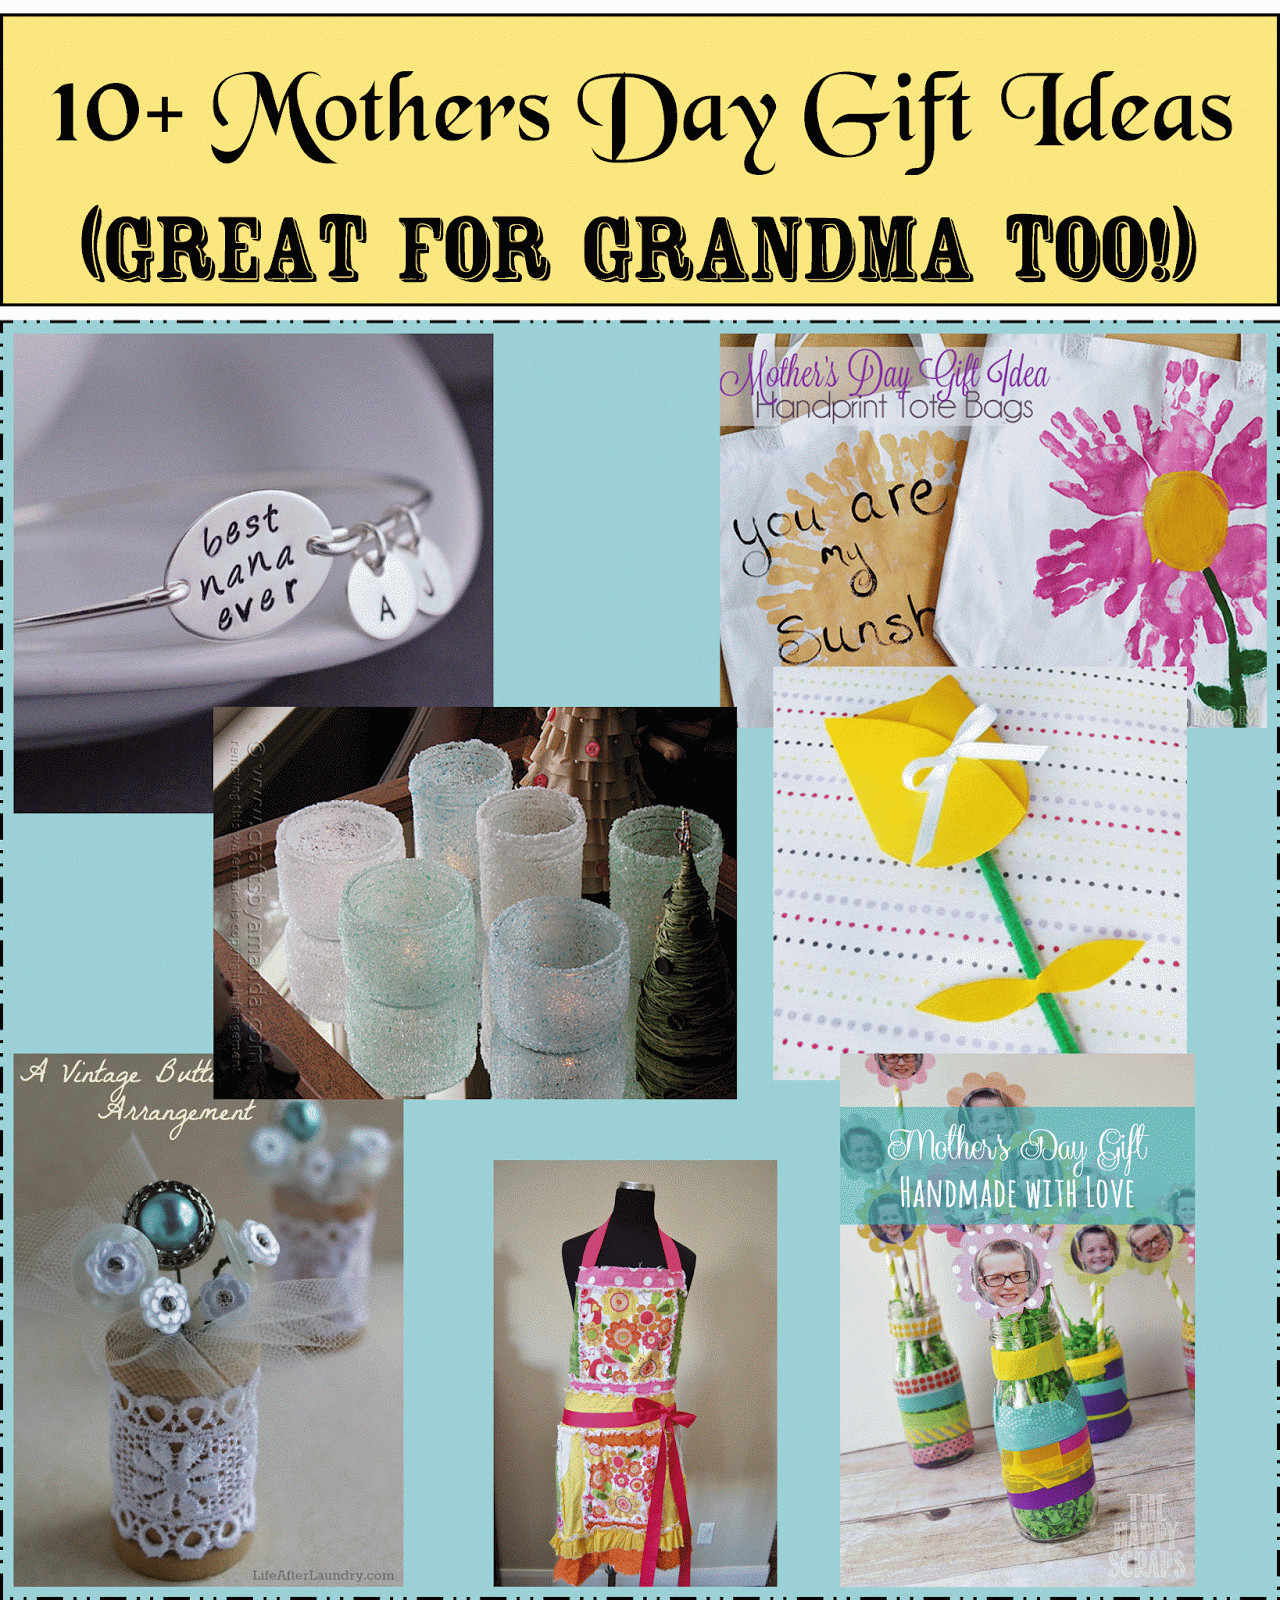 Great Mothers Day Gift Ideas
 Mother Day Gifts Roundup Perfect for Grandma Too